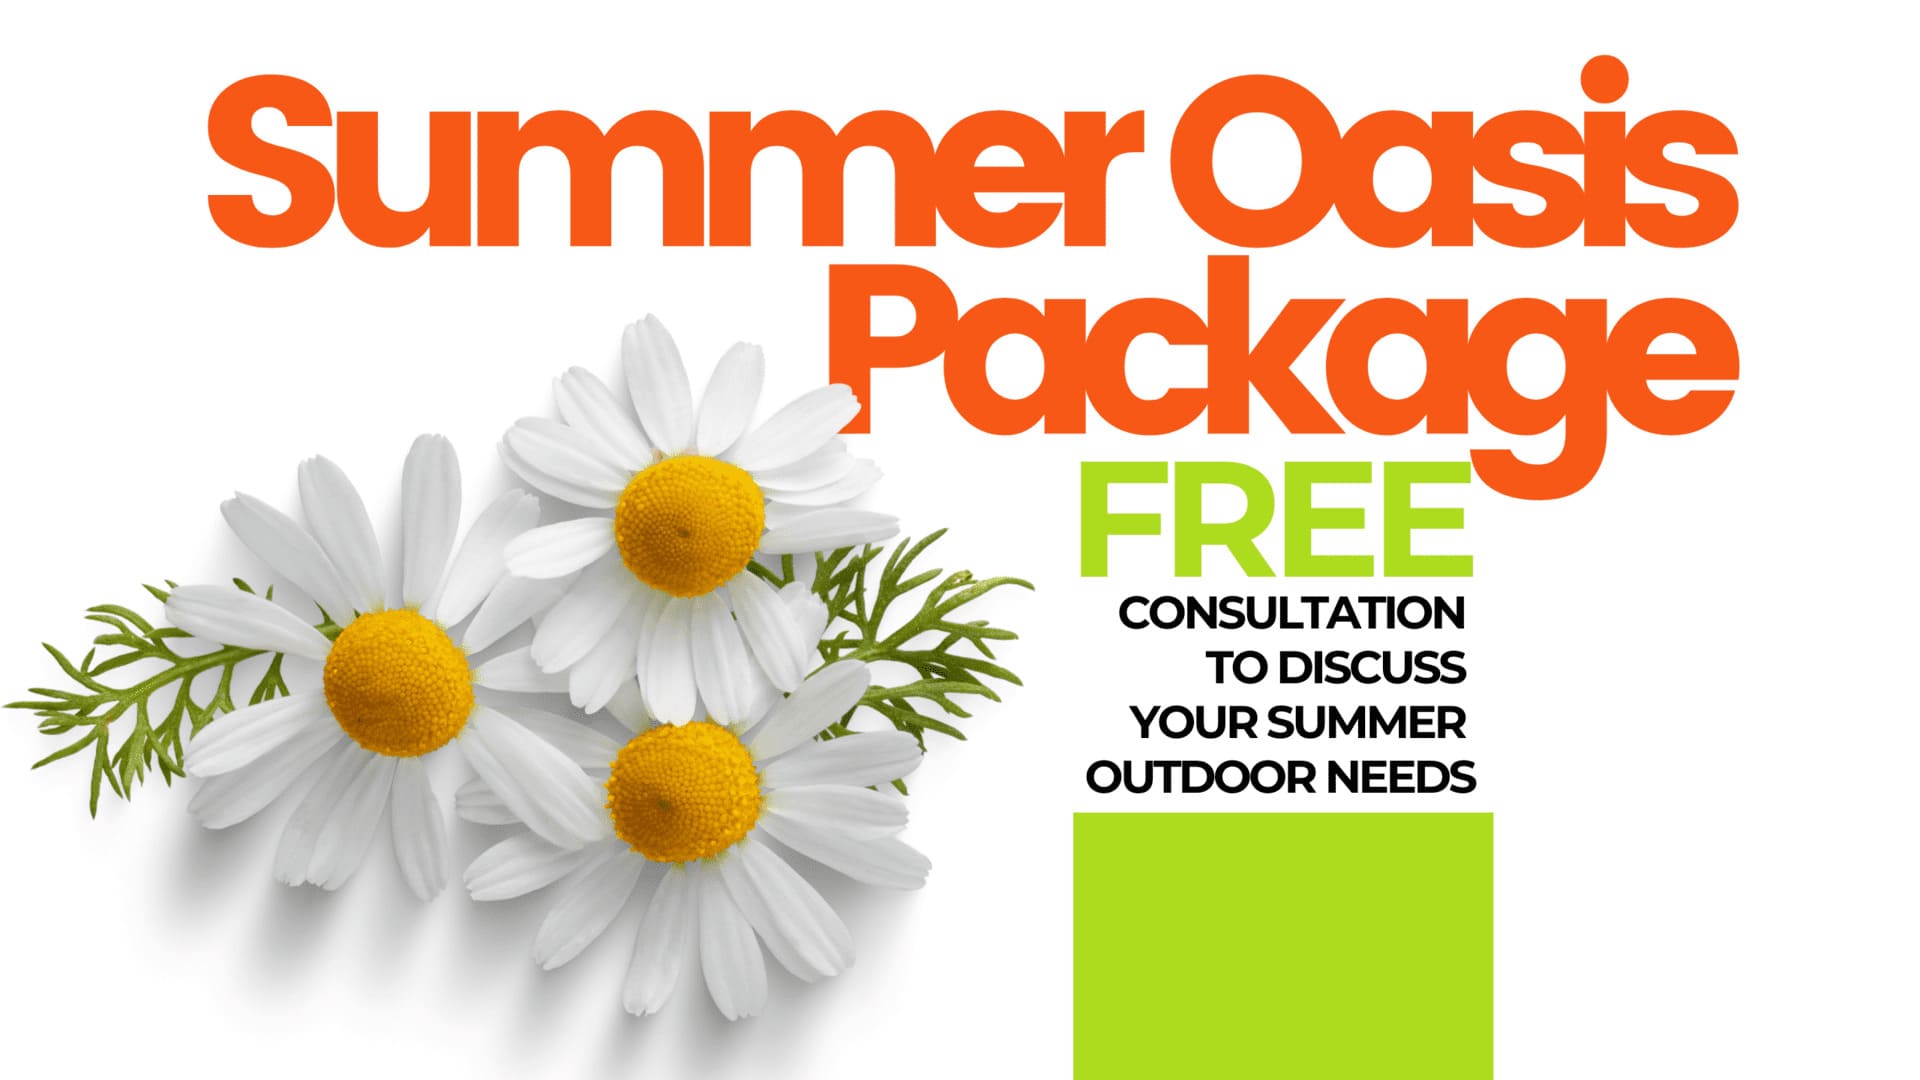 Summer oasis package. Free consultation to discuss your summer outdoor need